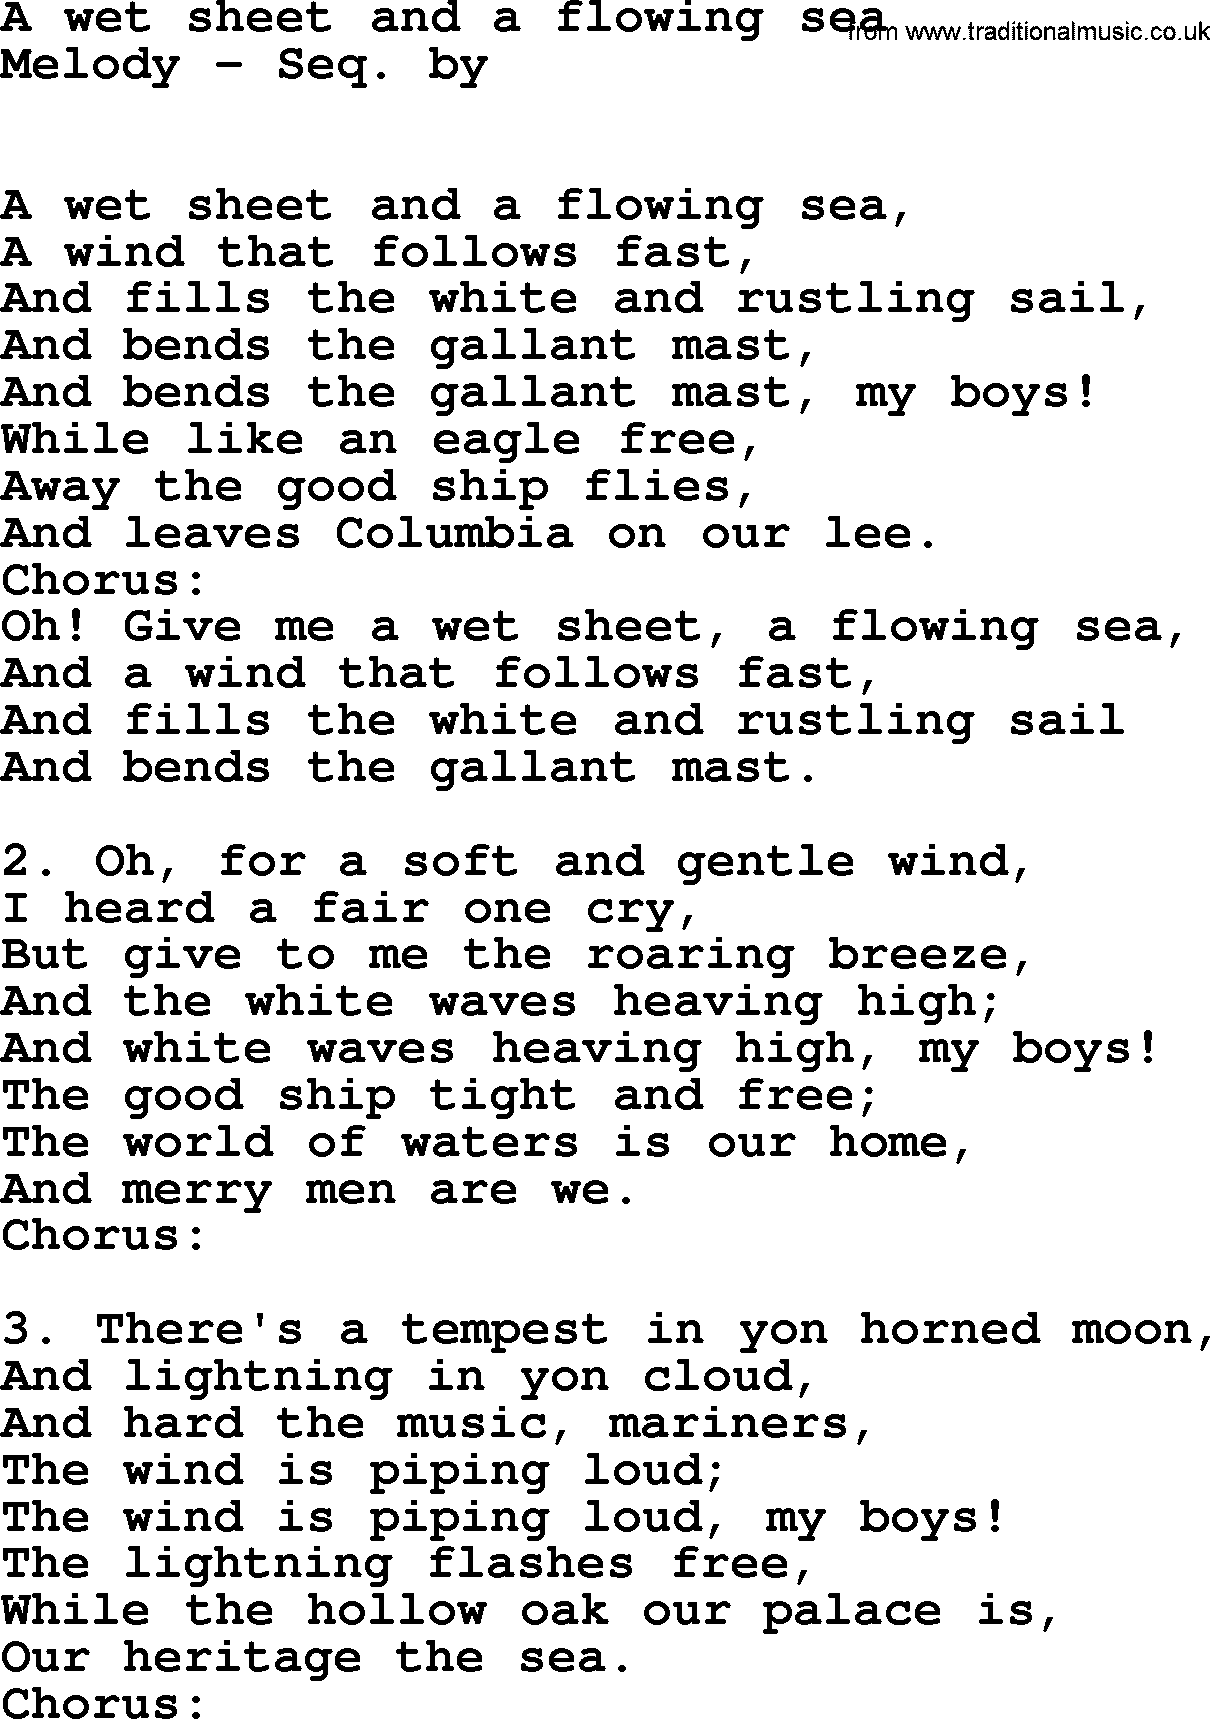 Sea Song or Shantie: A Wet Sheet And A Flowing Sea, lyrics